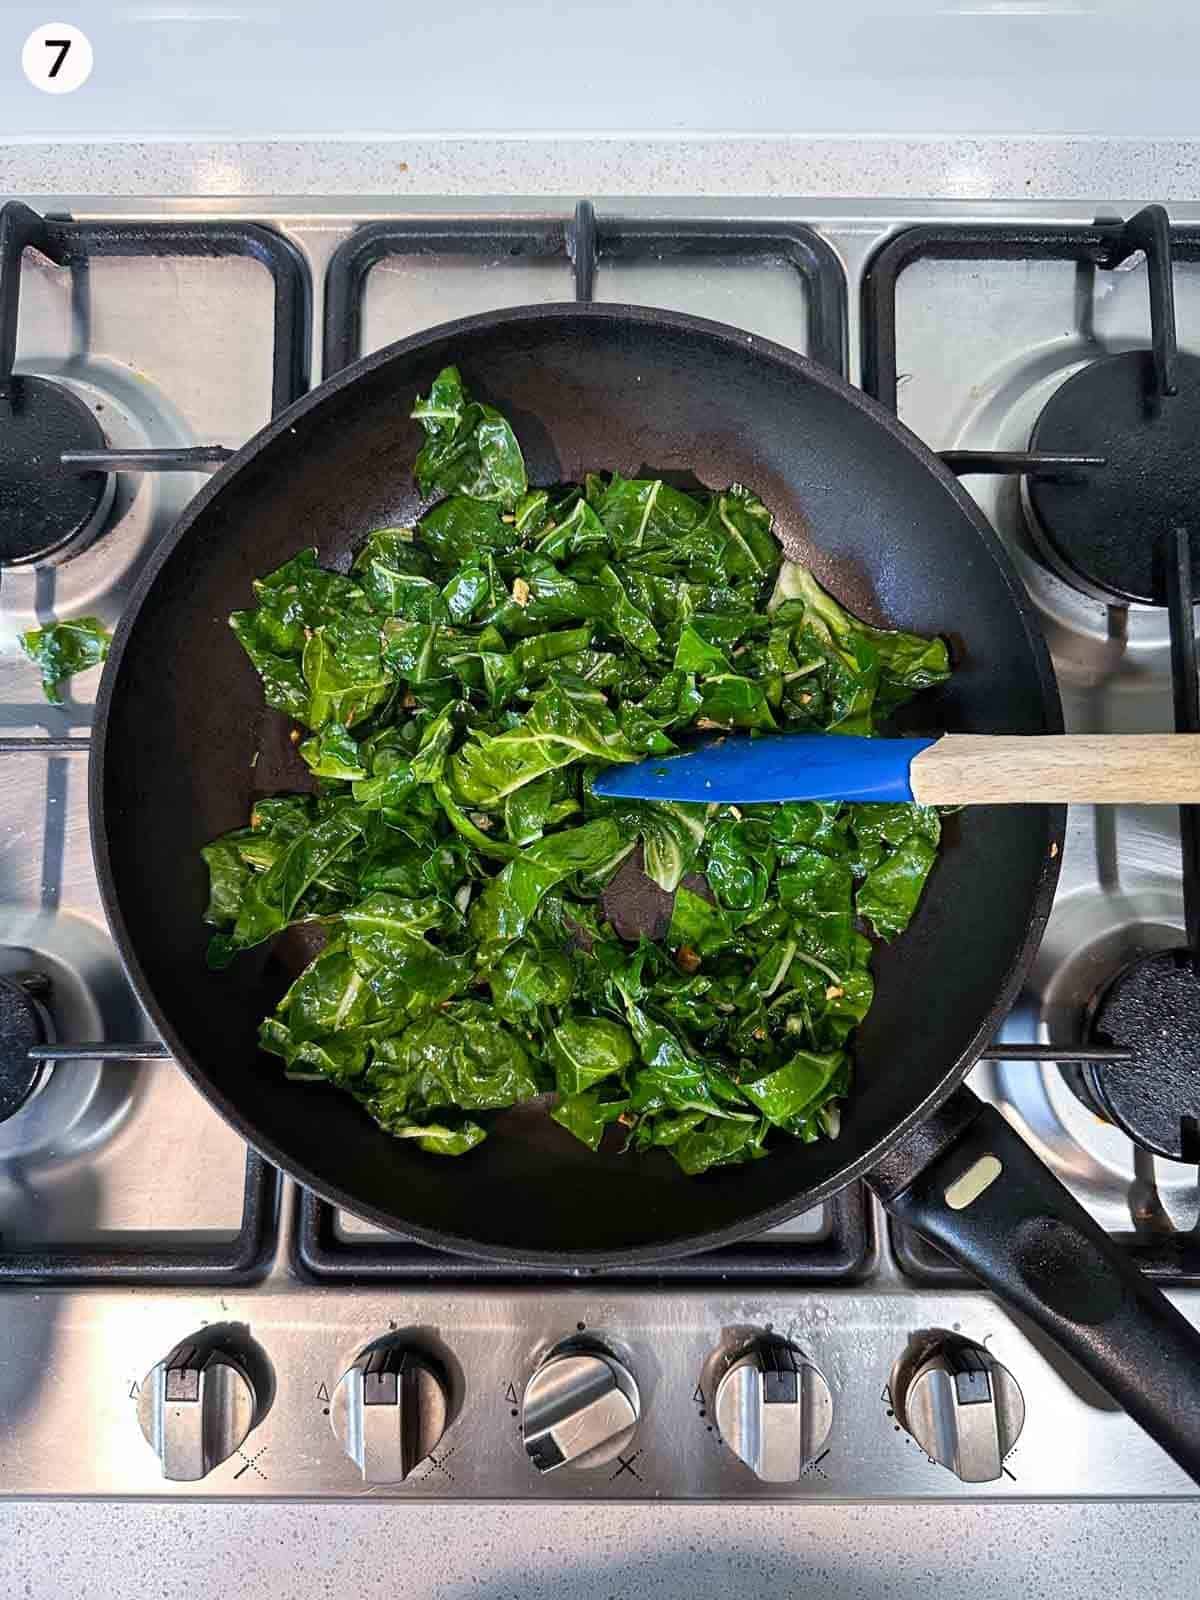 Sautéing silverbeet in a fry pan on a cooktop